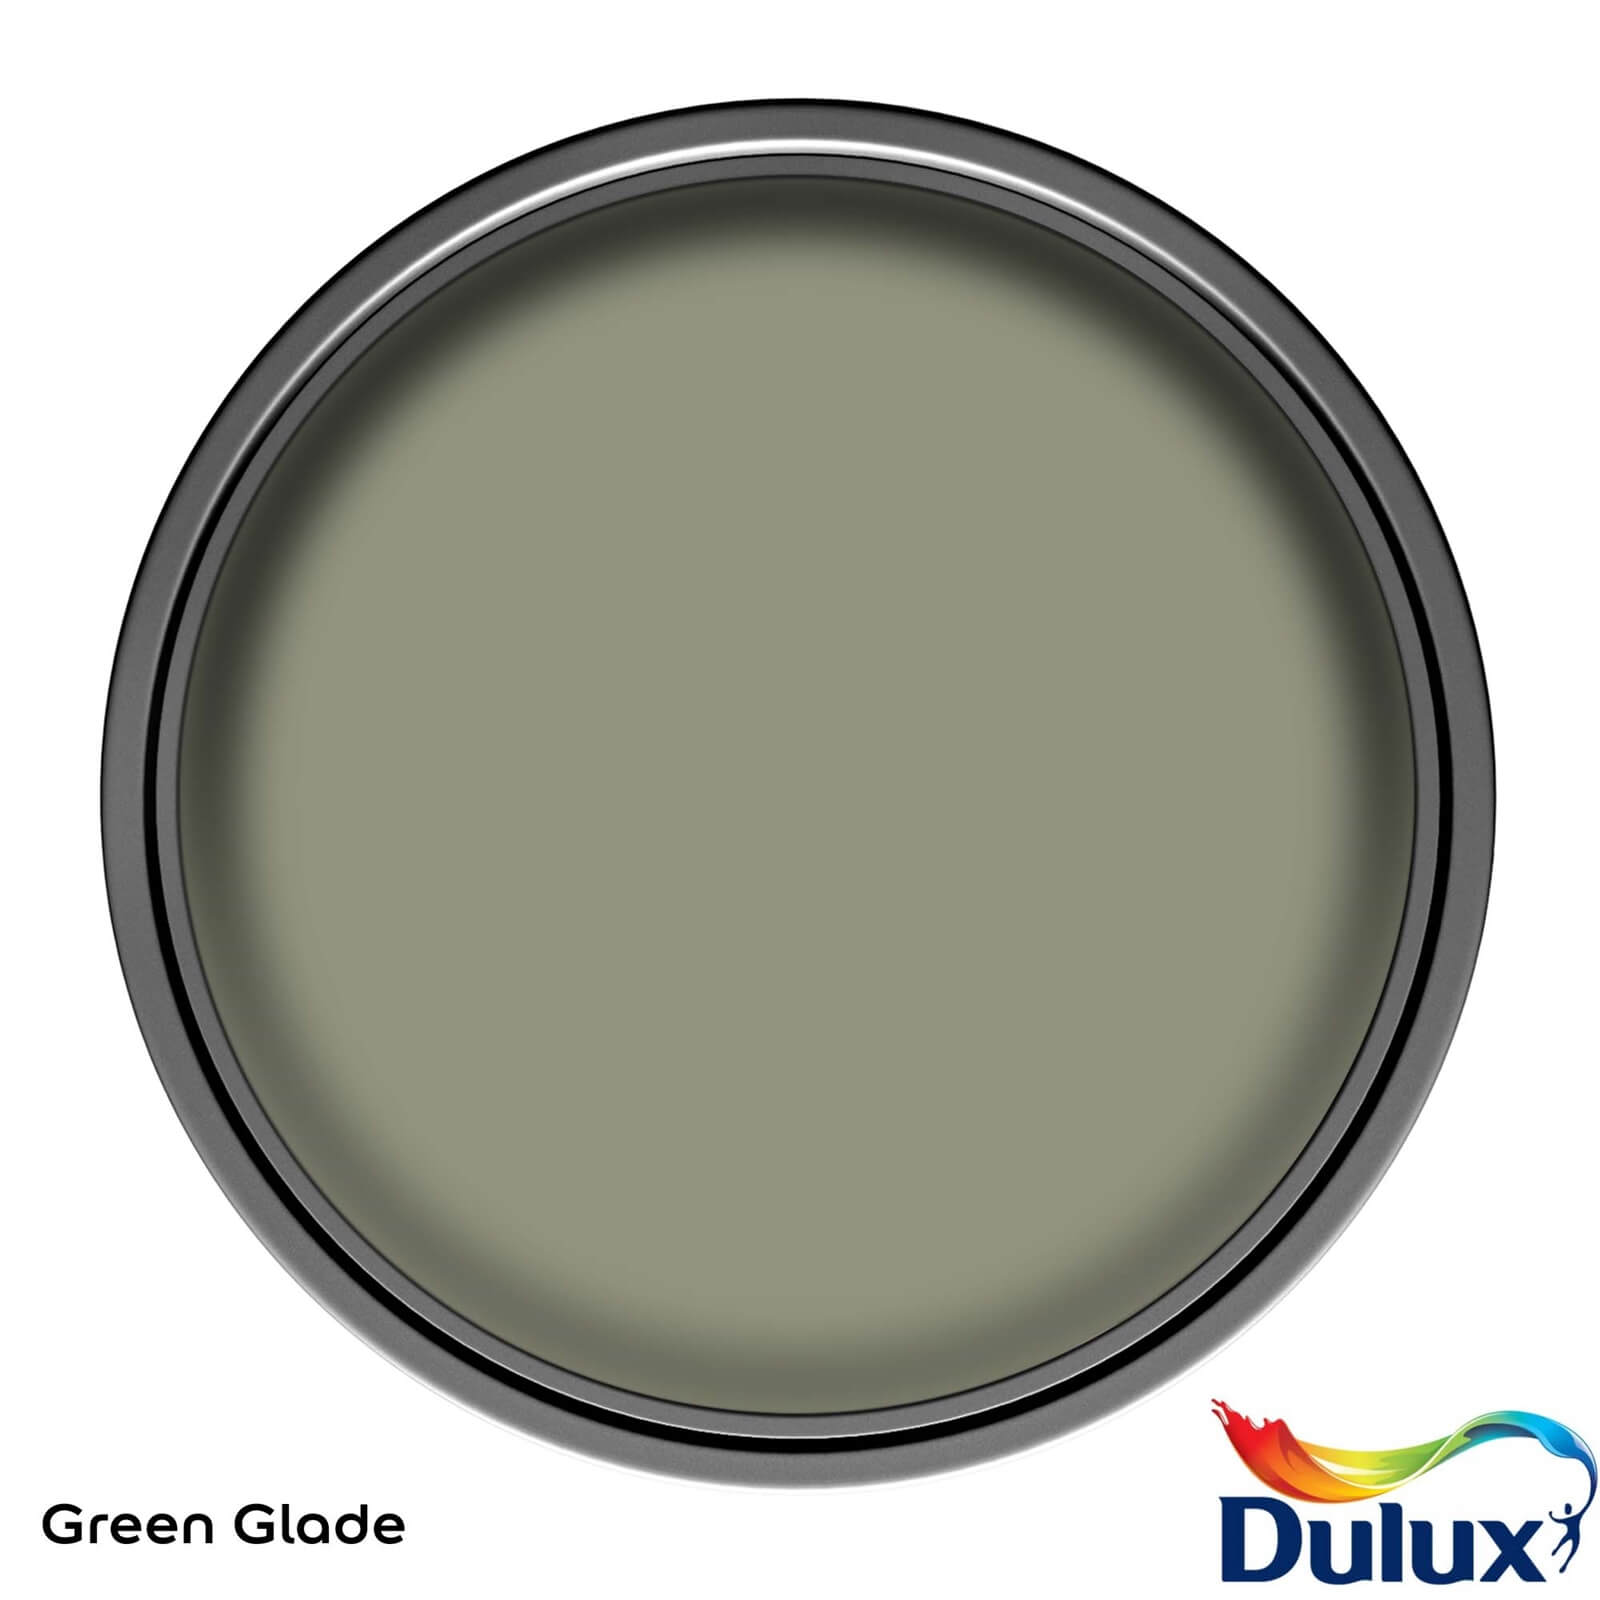 Dulux Weathershield Exterior Quick Dry Satin Paint Green Glade - 750ml